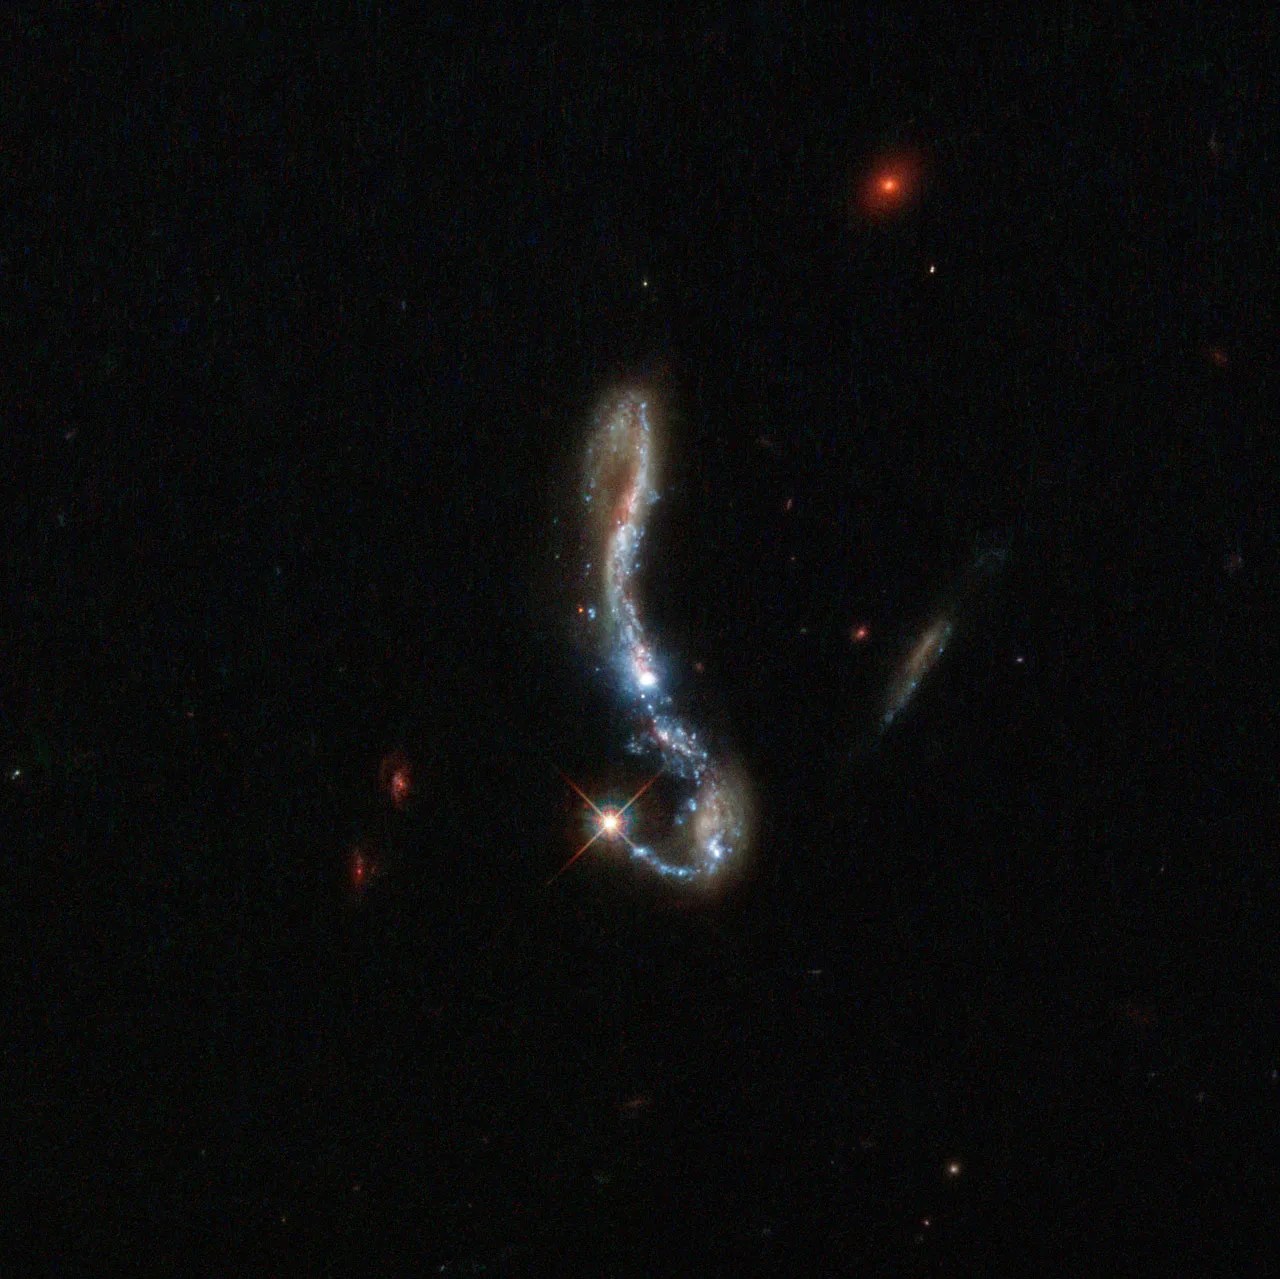 In this inverted question mark galaxy, a bright starburst decorates the end of the crook